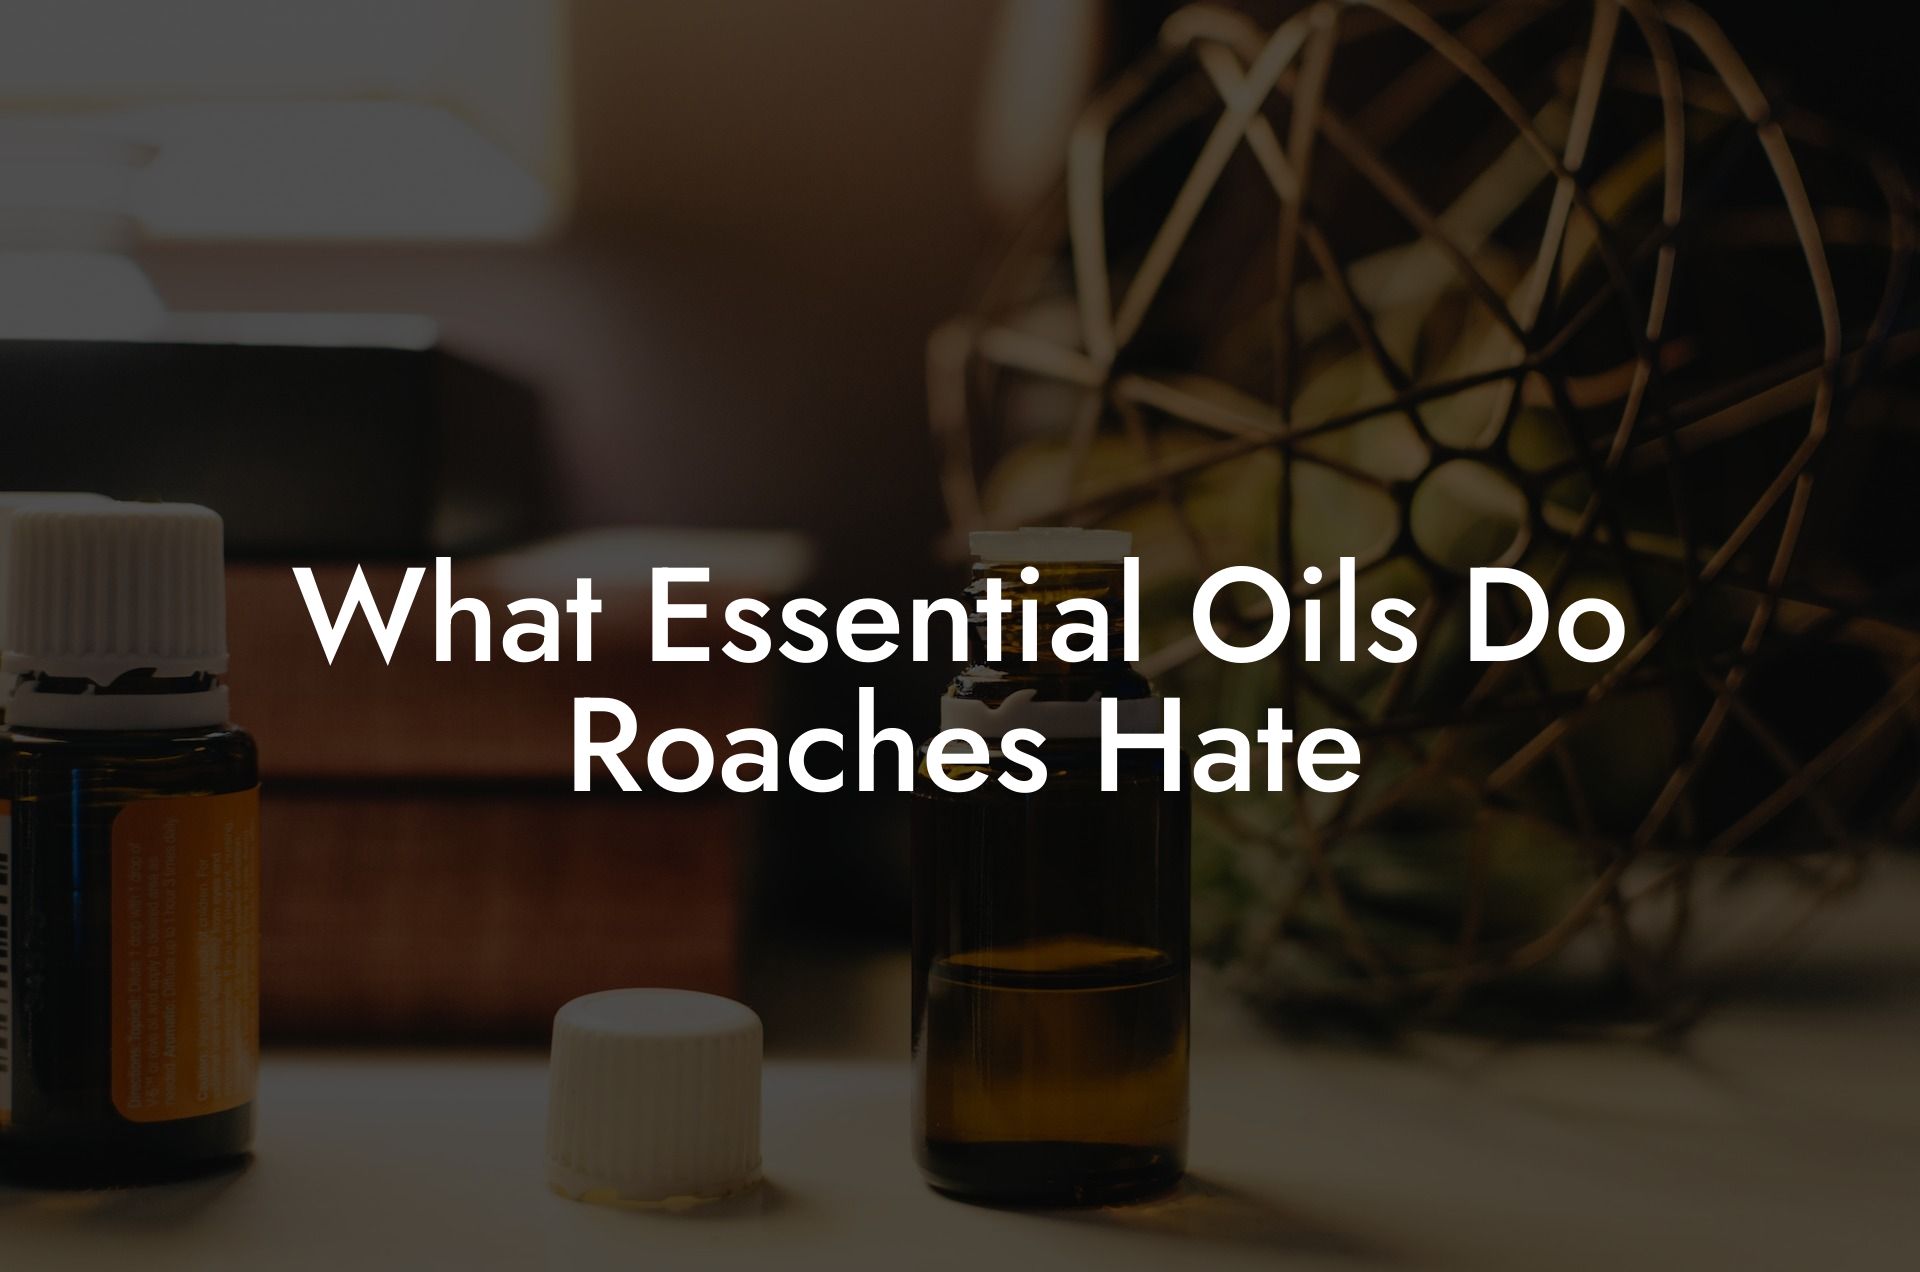 What Essential Oils Do Roaches Hate